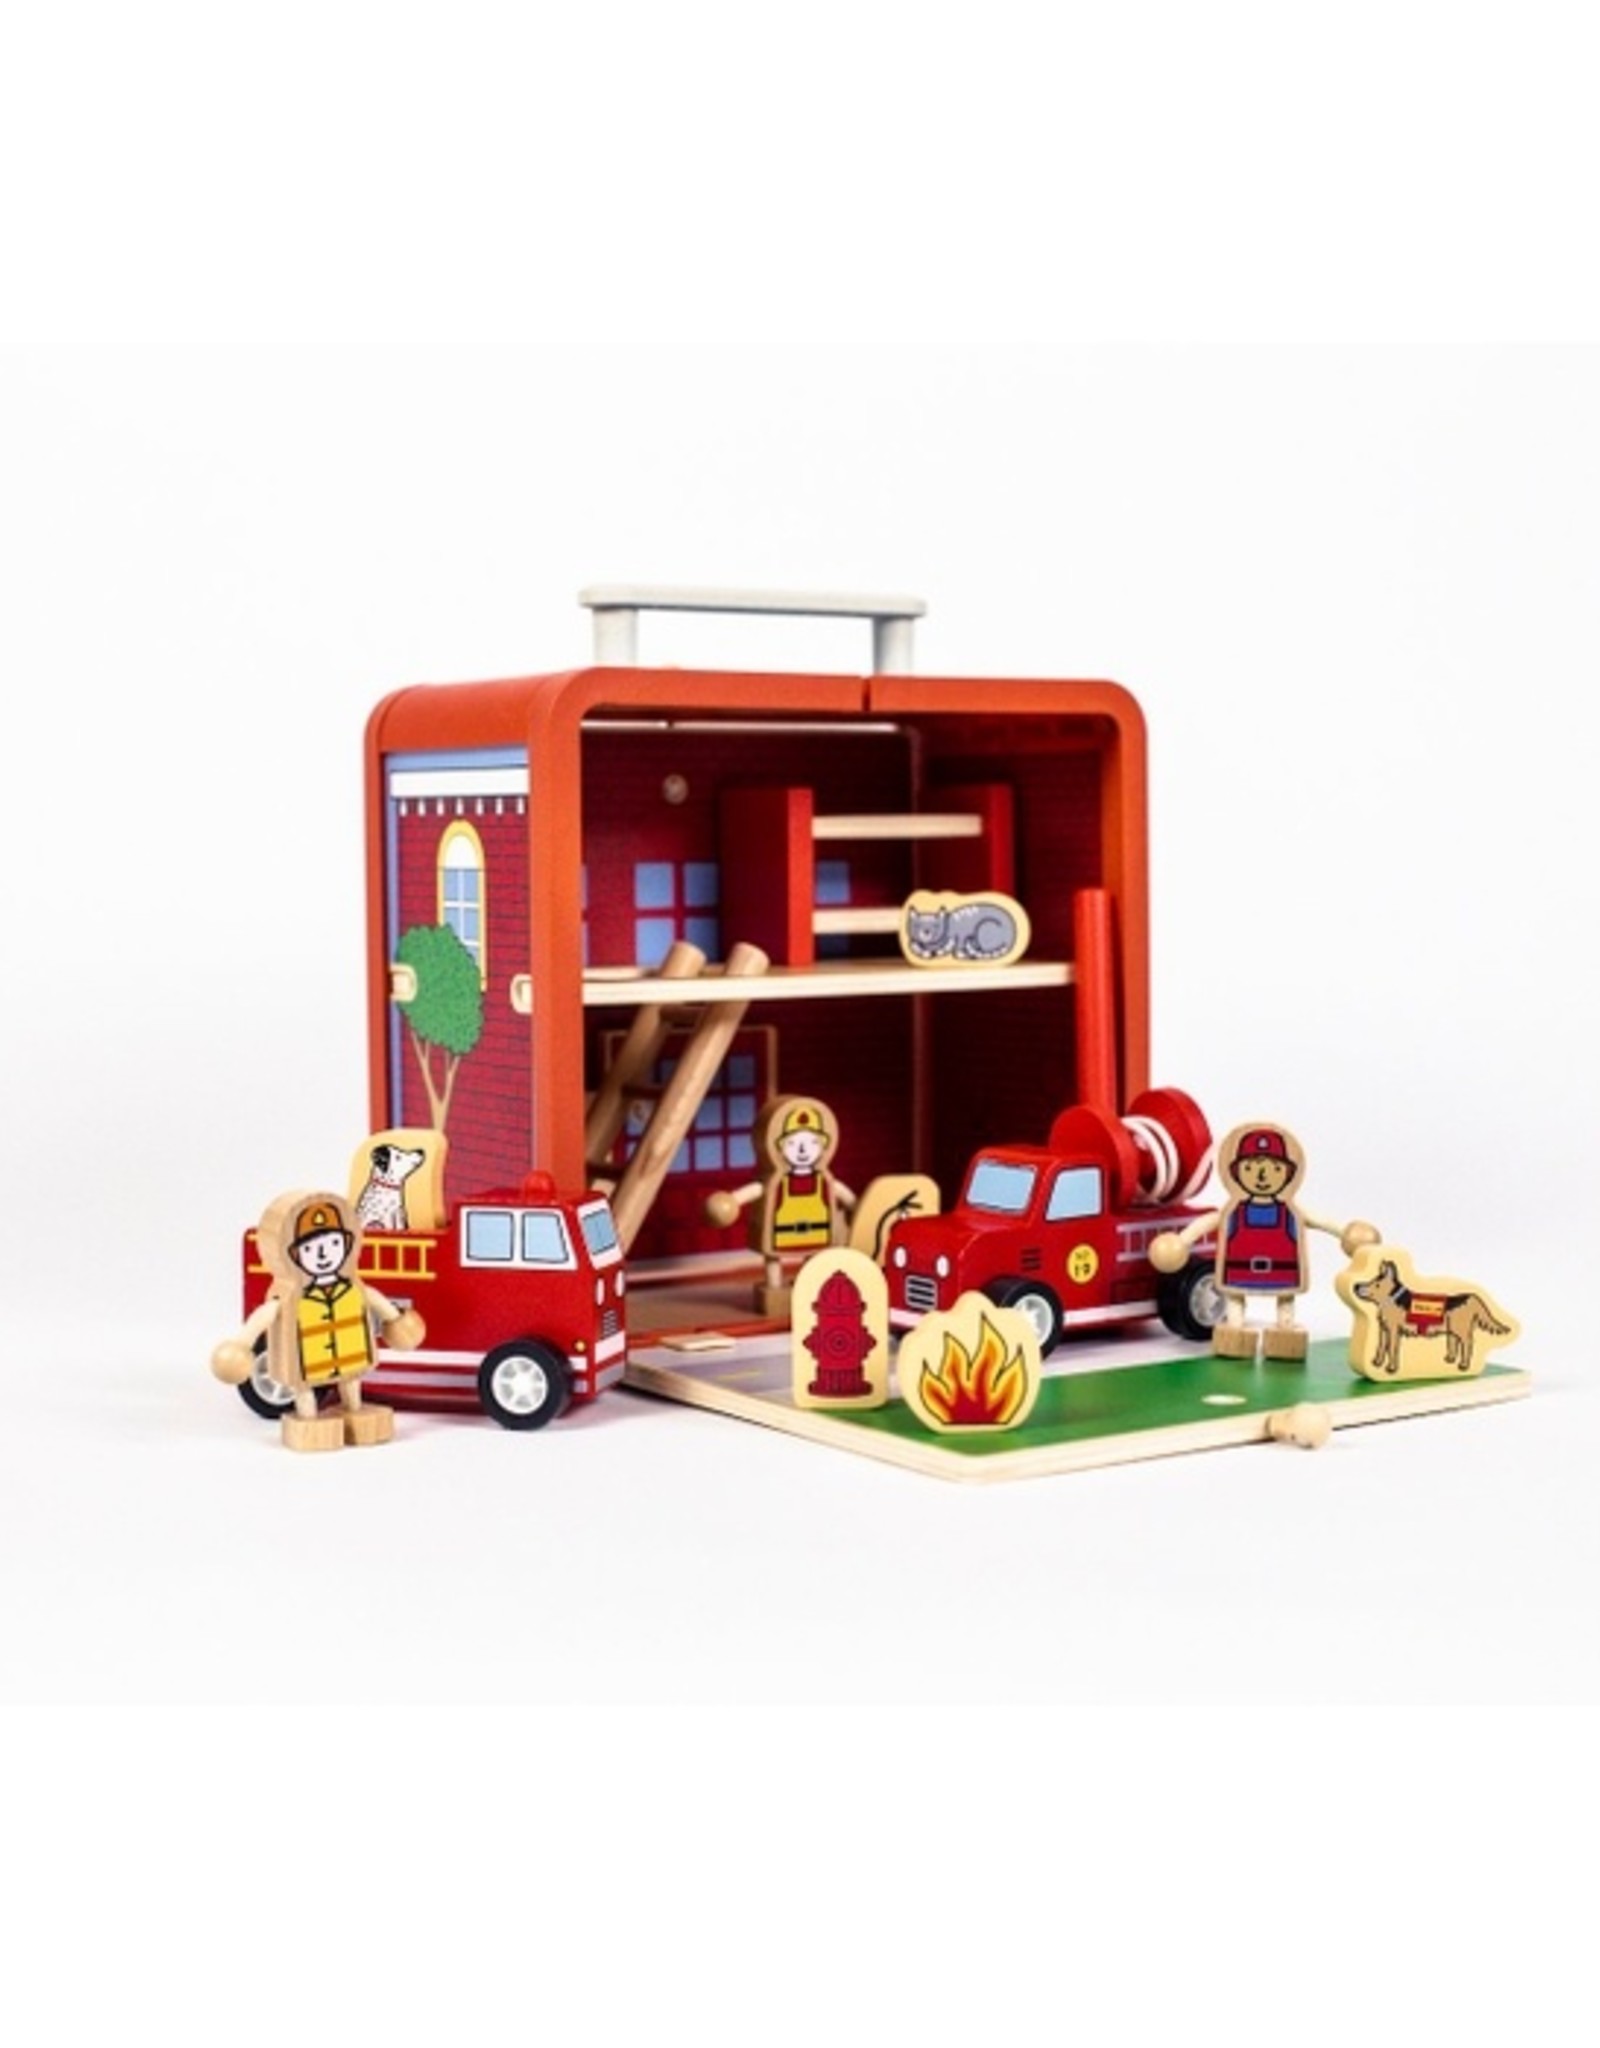 Jack Rabbit Creations Fire House Suitcase Playset